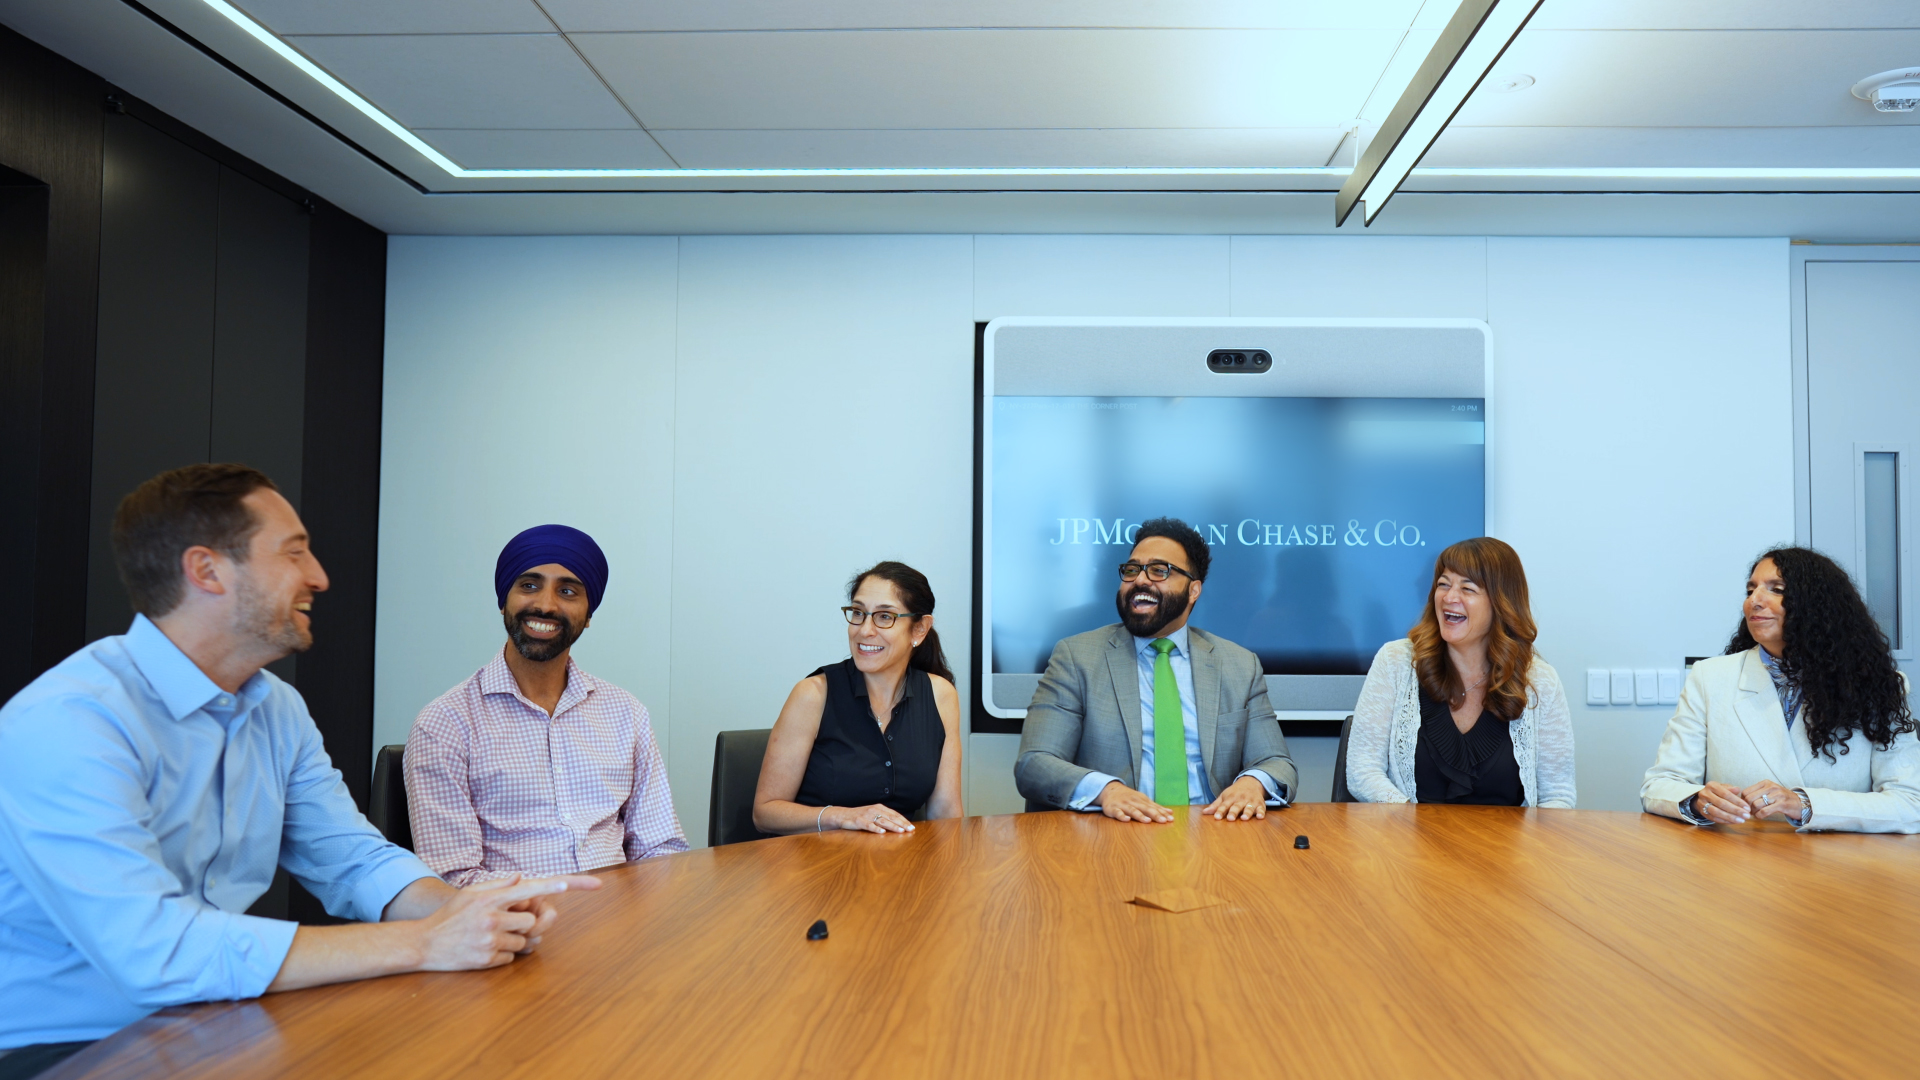  JPMorgan Chase’s CTC team sits around a conference table, talking and laughing.